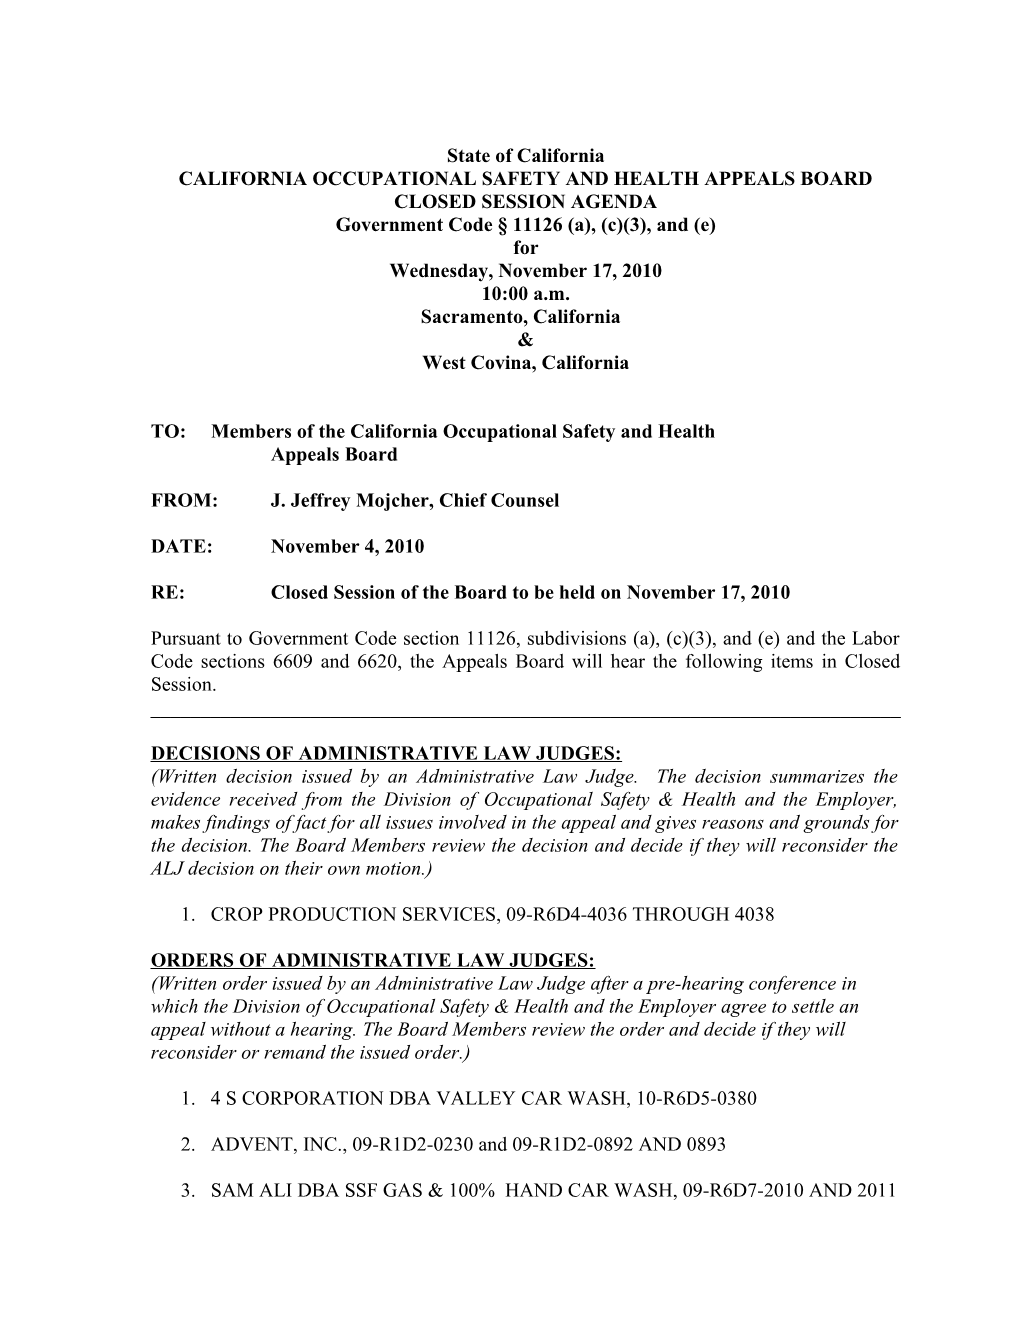 California Occupational Safety & Health Appeals Board s5